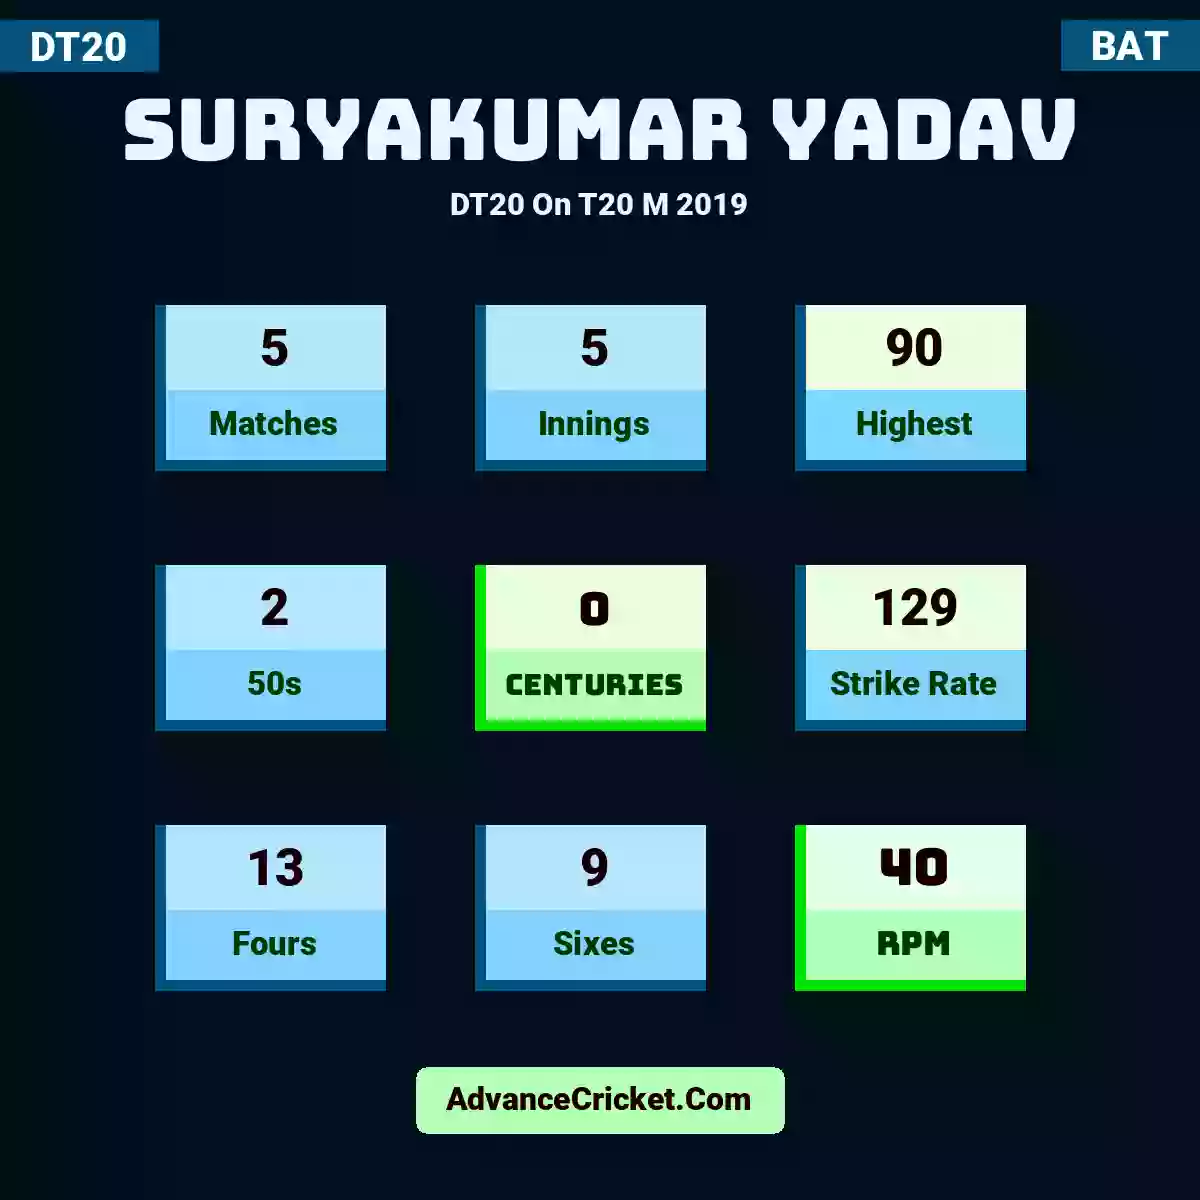 Suryakumar Yadav DT20  On T20 M 2019, Suryakumar Yadav played 5 matches, scored 90 runs as highest, 2 half-centuries, and 0 centuries, with a strike rate of 129. S.Yadav hit 13 fours and 9 sixes, with an RPM of 40.